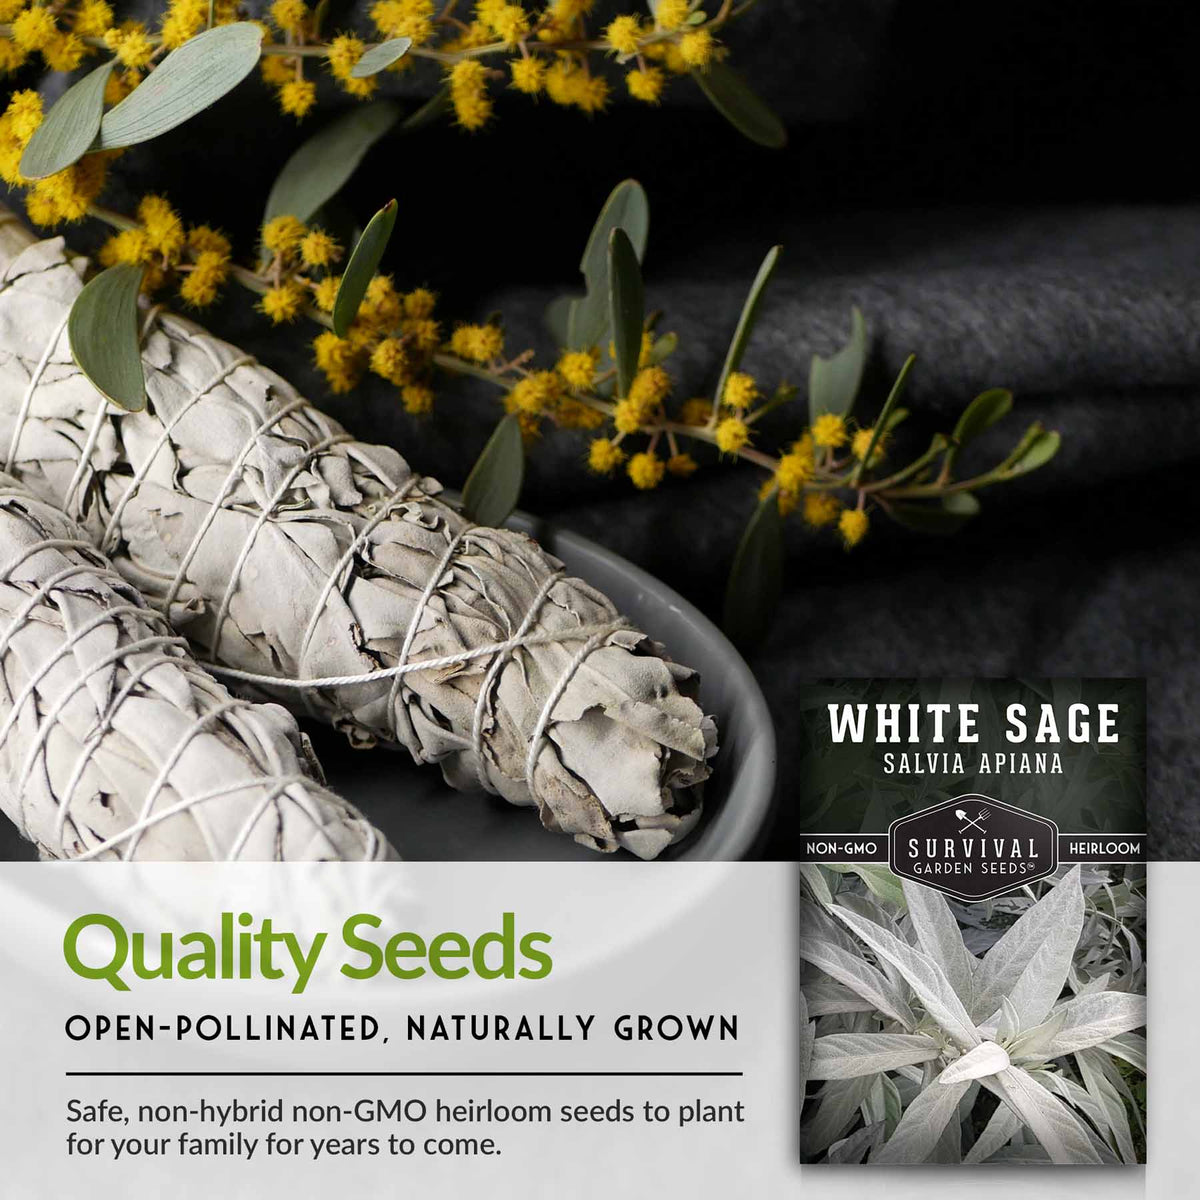 Quality Seeds open-pollinated, naturally grown